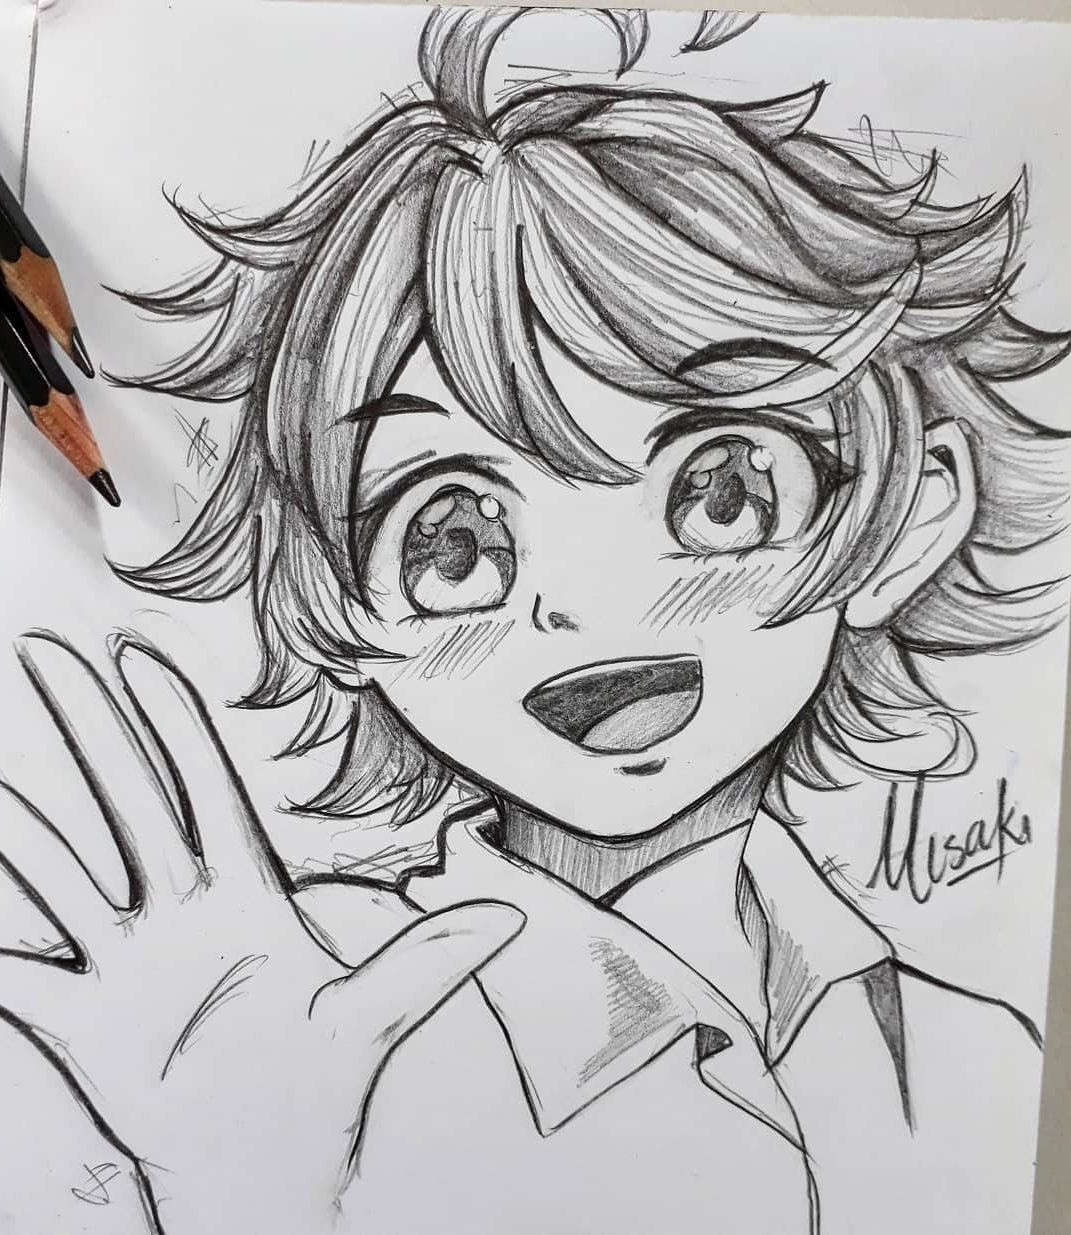 How to draw anime – step by step tutorials and pictures